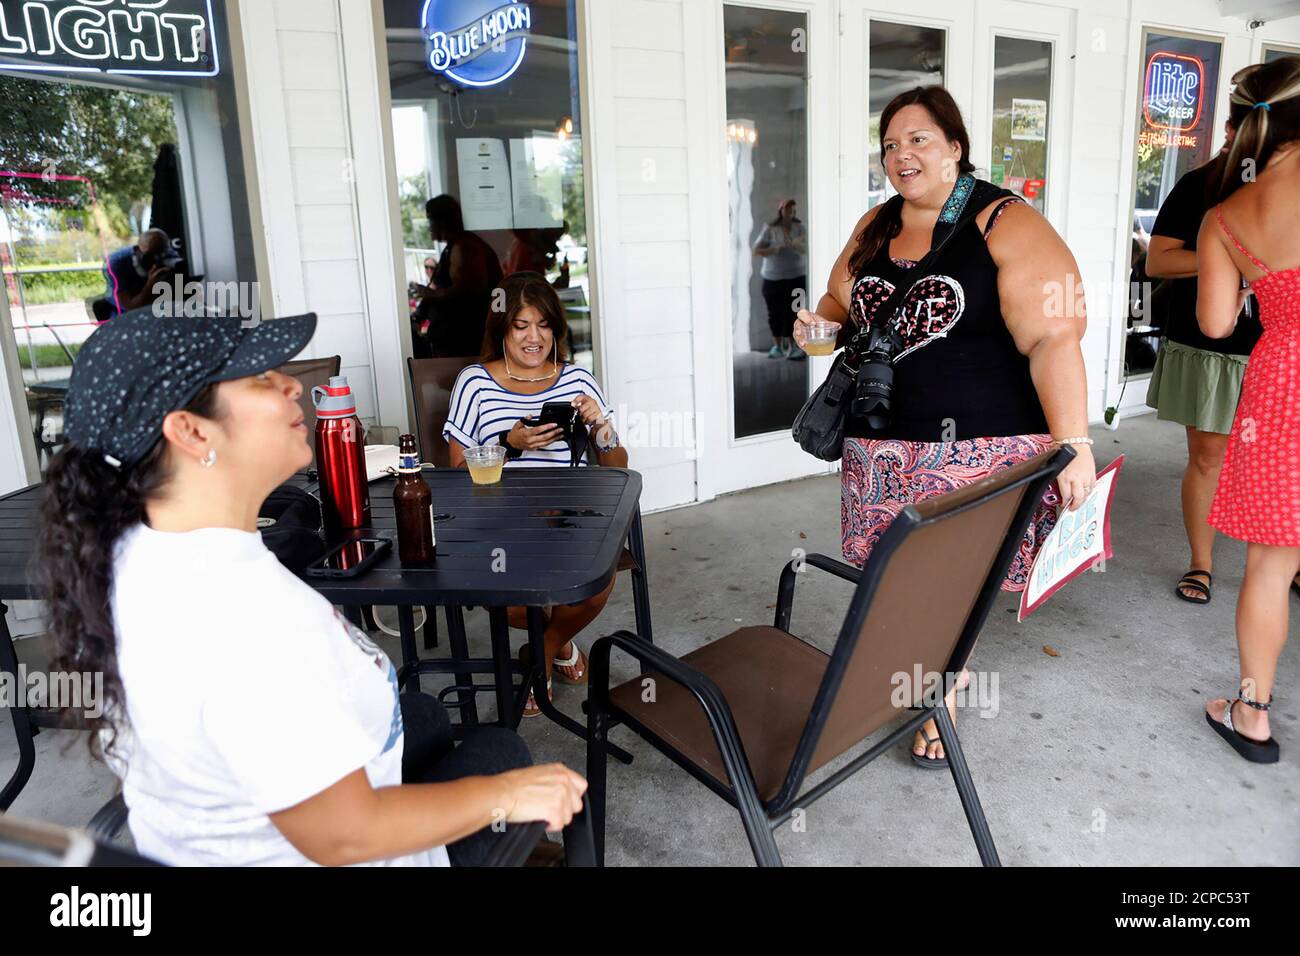 Tara Hill (R) talks with her supporters during the reopen Florida 'maskless' rally and dinner held at 33 & Melt restaurant to protest mandatory face mask restrictions during the coronavirus disease (COVID-19) pandemic in Windermere, Florida, U.S. July 11, 2020. REUTERS/Octavio Jones Stock Photo